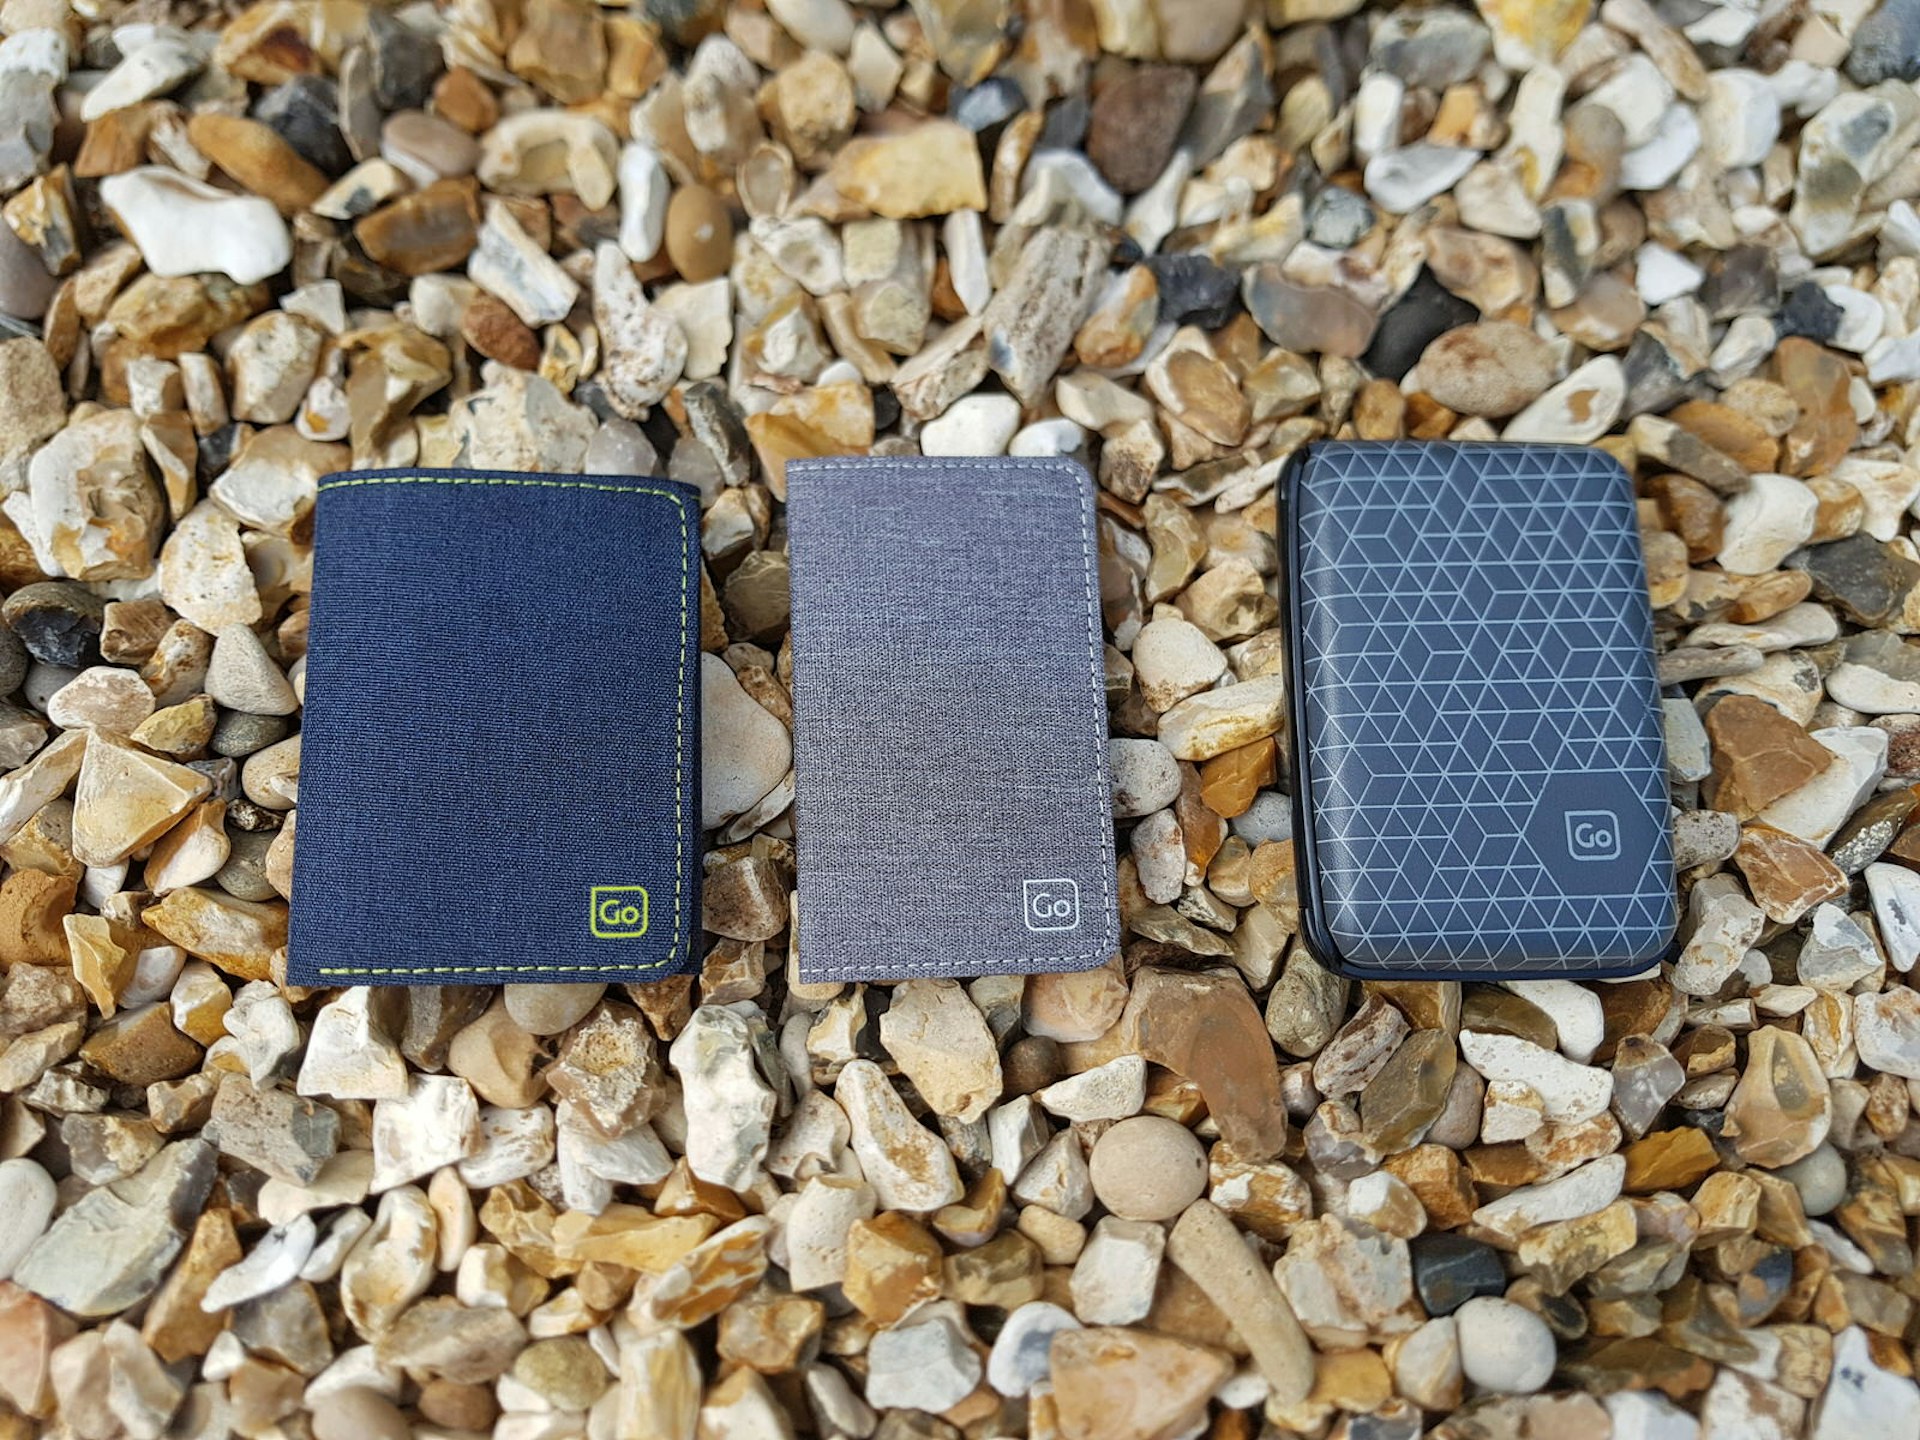 Three Go Travel wallets; one denim, one grey and one with a hard plastic shell